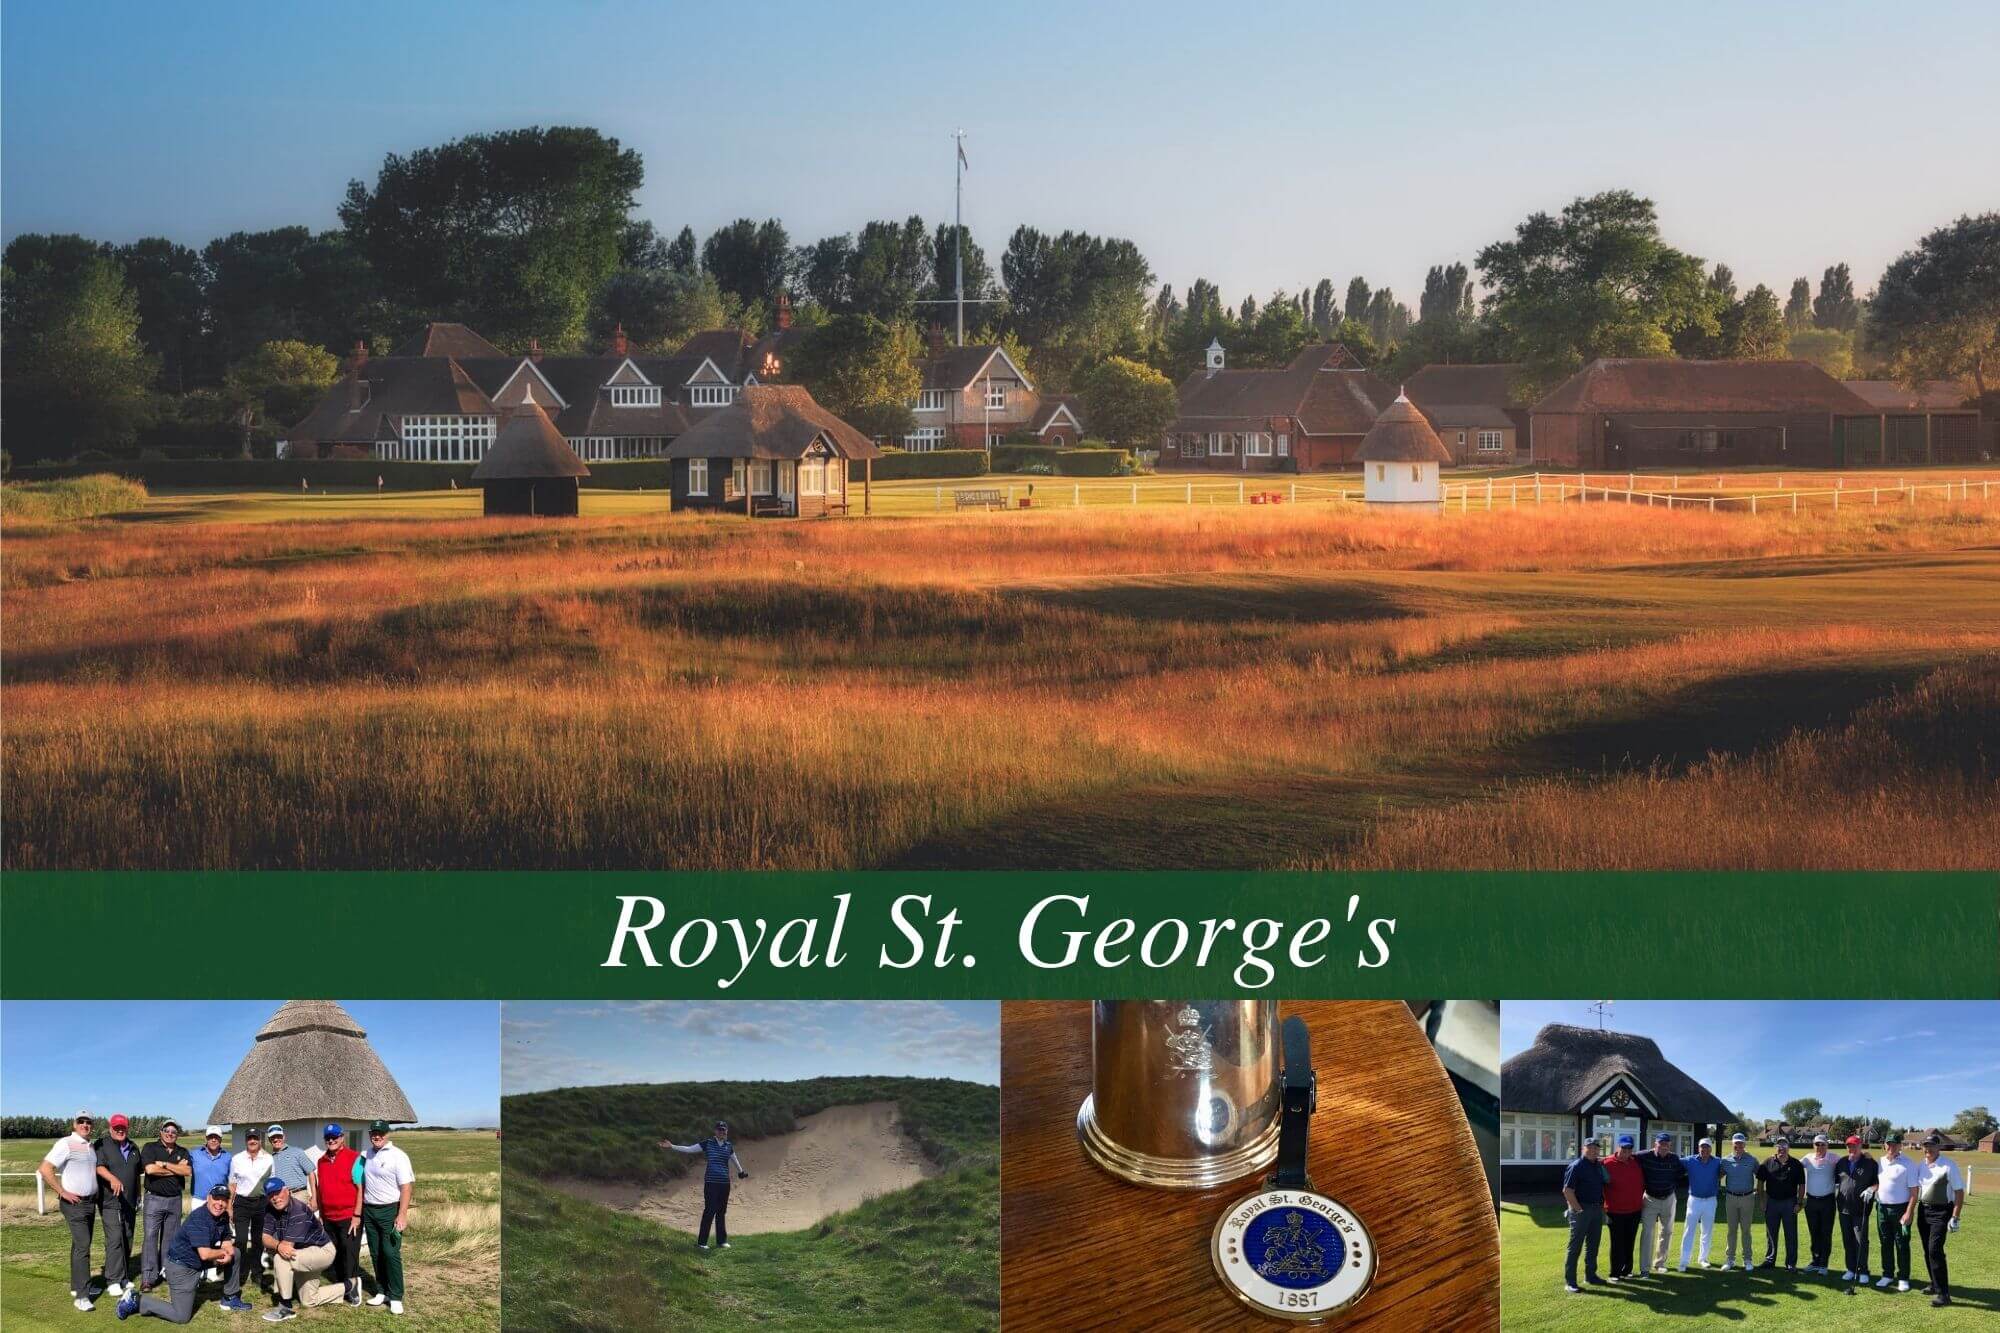 Royal St. George's Open Championship Golf Courses